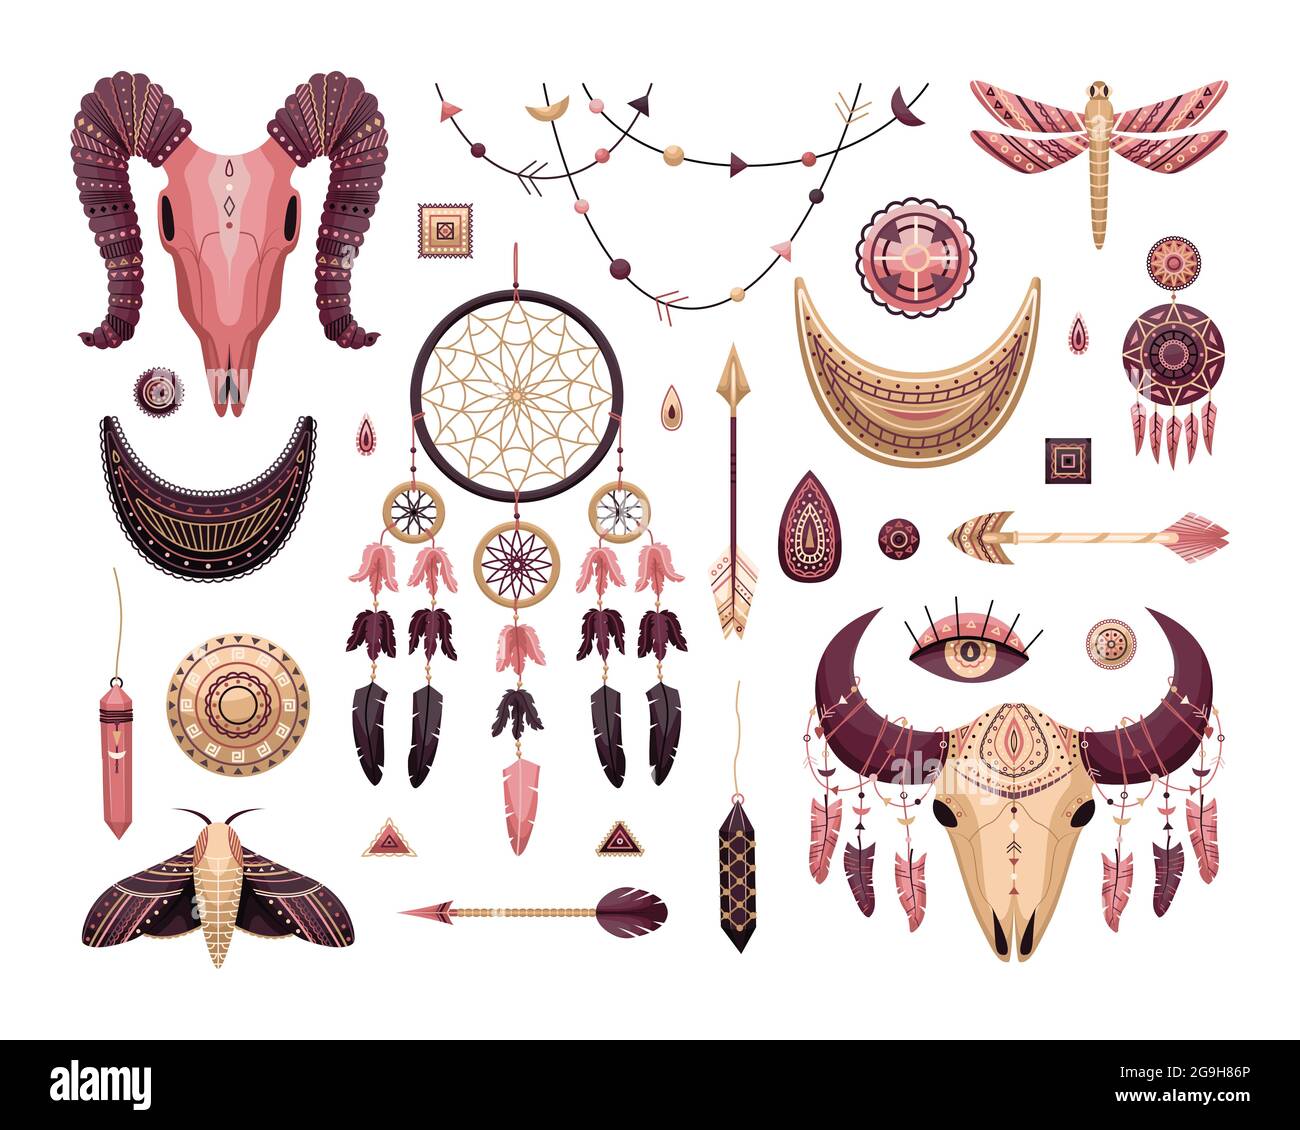 Vector set of boho illustrations. Flat style. Dreamcathers, animal skull, feathers and arrows Stock Vector